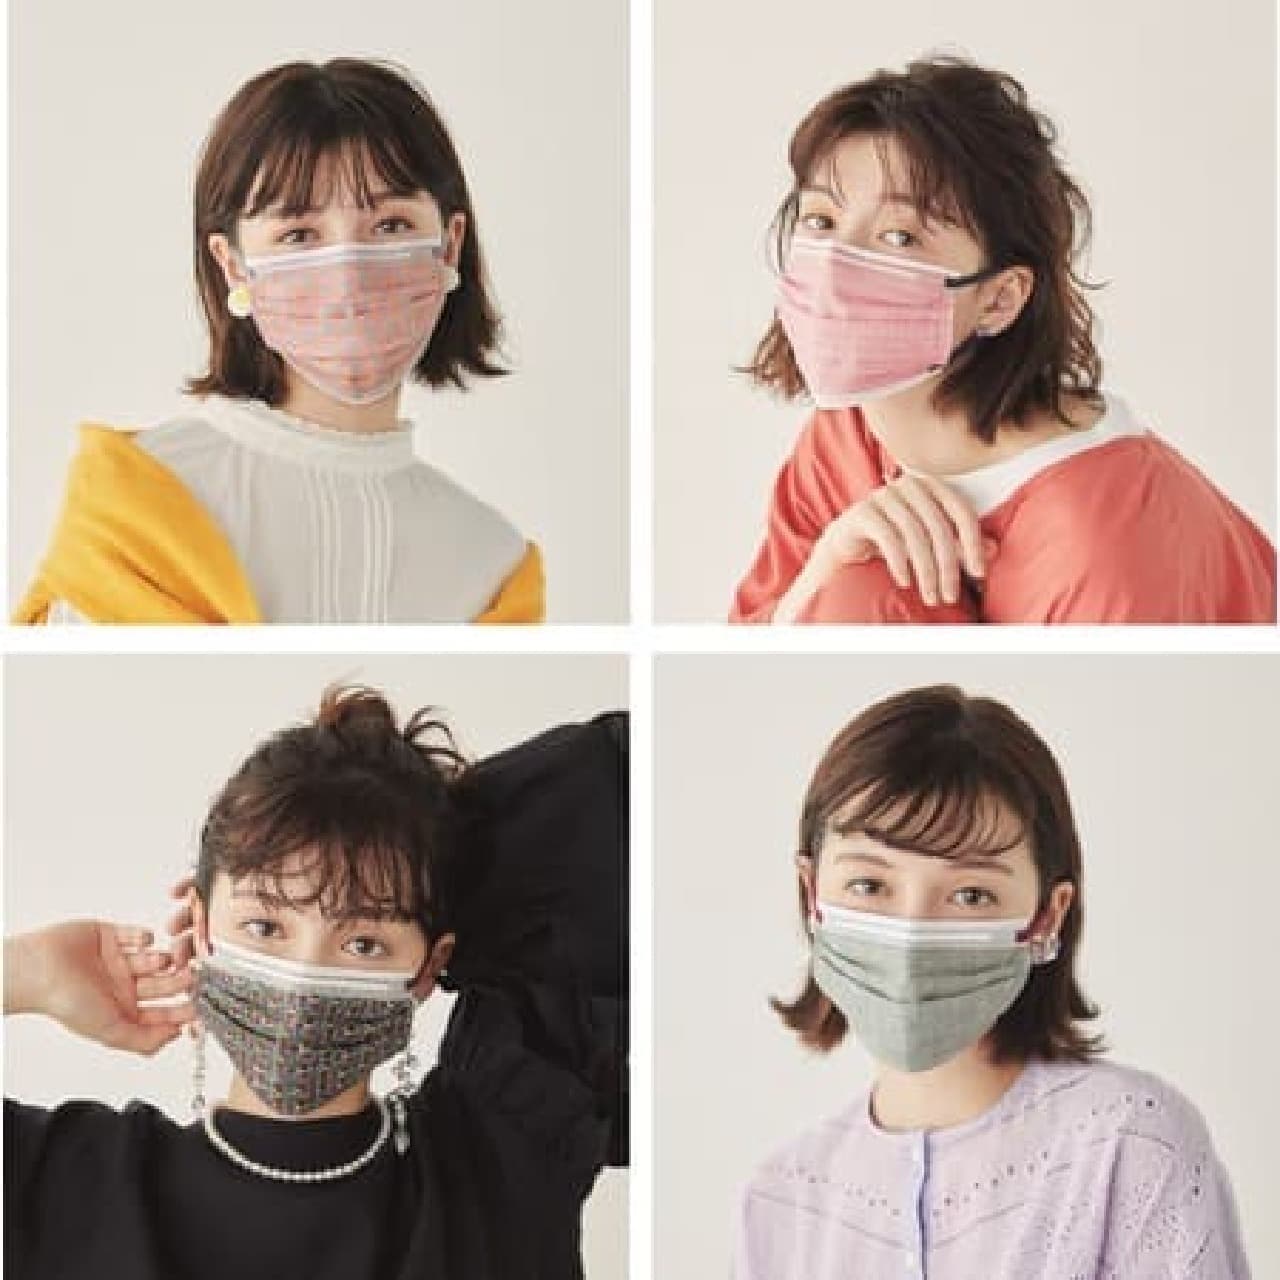 kippis perfect beauty mask book" at FamilyMart and other stores -- Scandinavian design non-woven masks and gauze masks